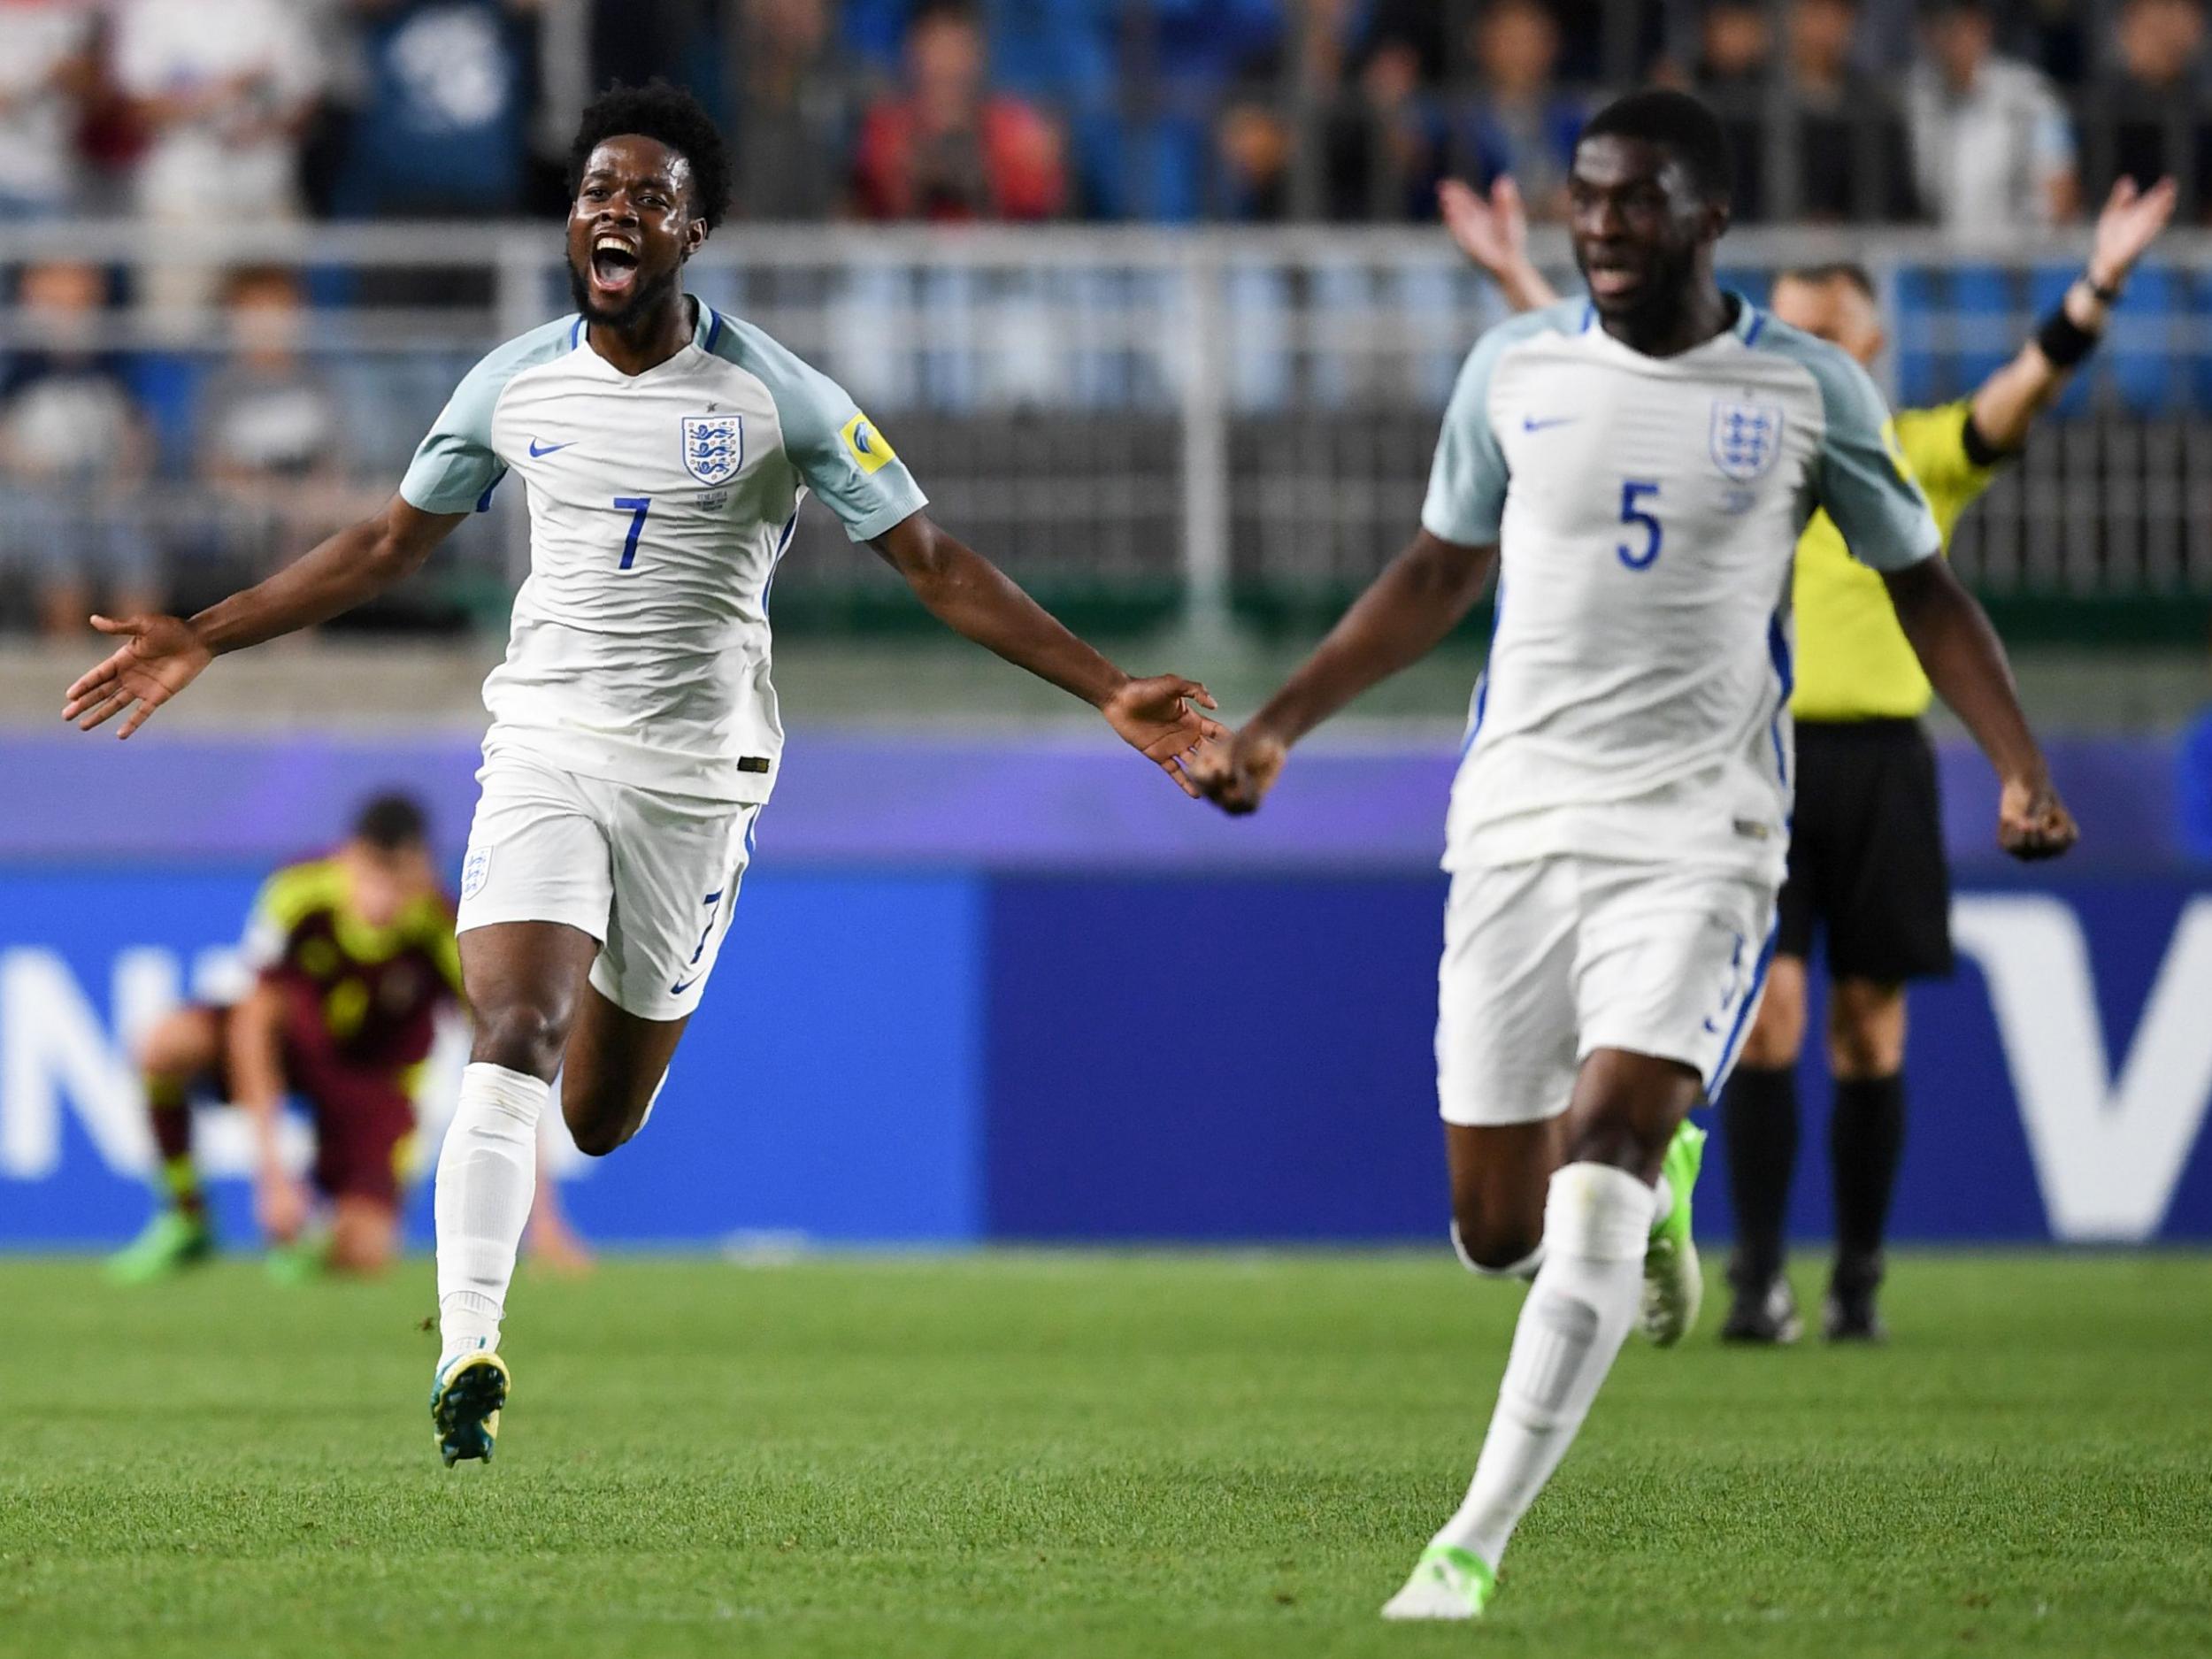 England had never before won the U20 World Cup